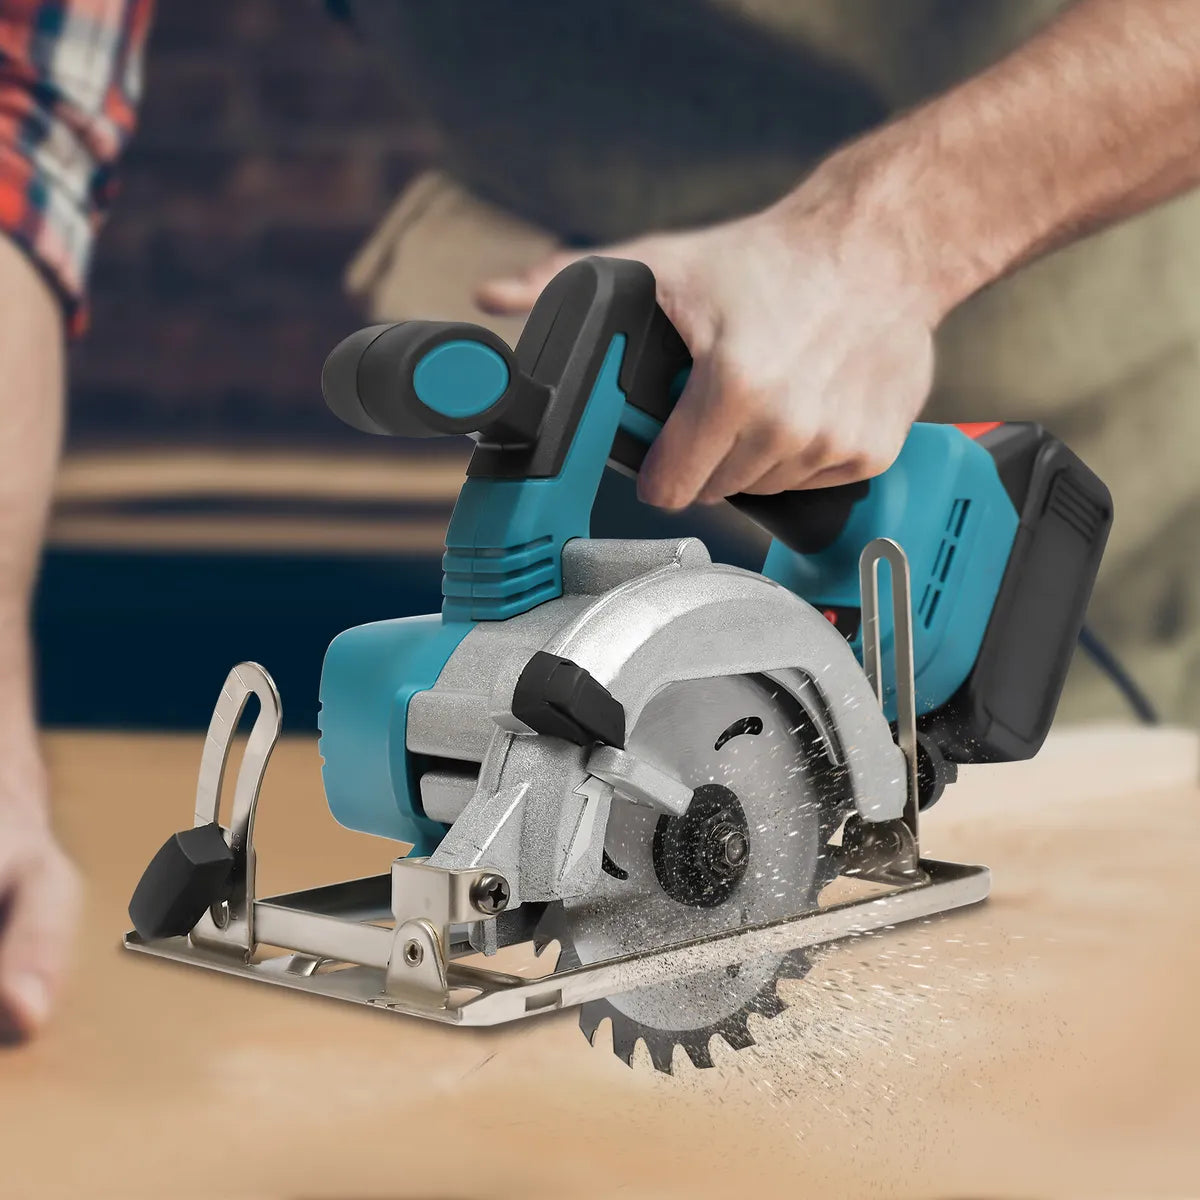 Top 5 Must-Have Tools for Every DIY Home Renovation Project